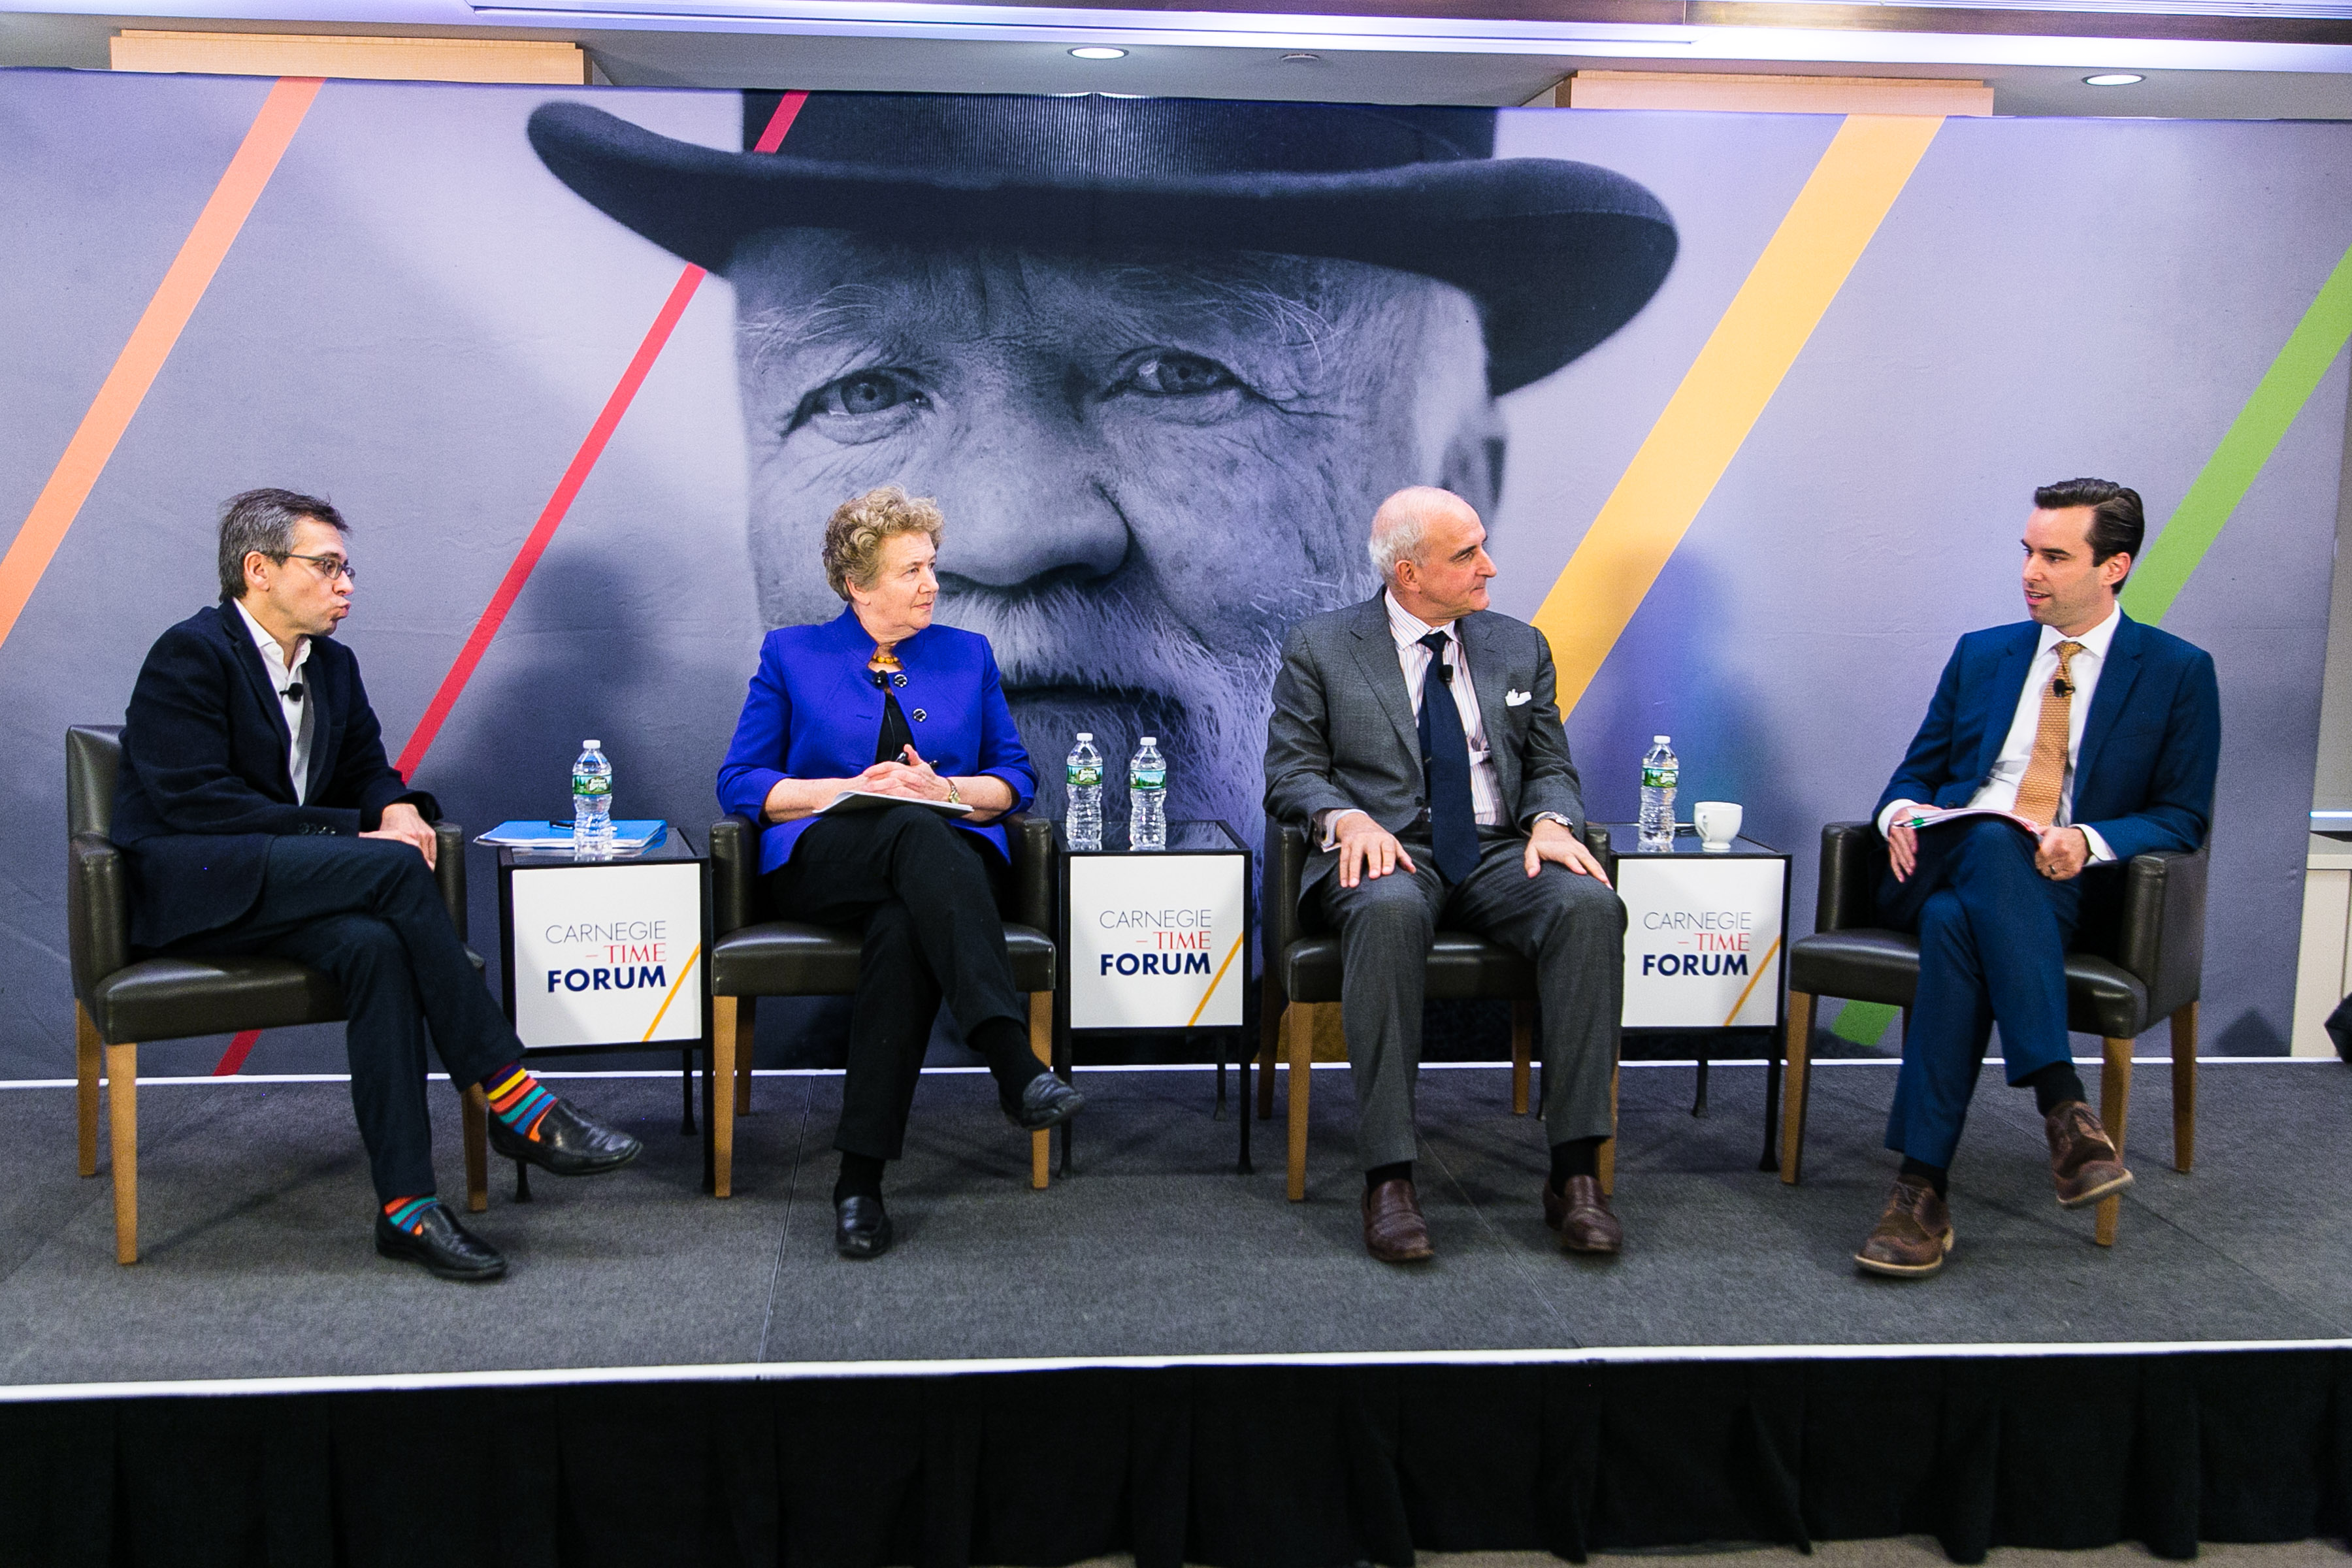 Ian Bremmer, Pippa Norris, Roger Cohen and Michael Scherer discuss populism during the Carnegie Corporation-TIME forum on Feb. 7, 2017. (Andrew Kist)